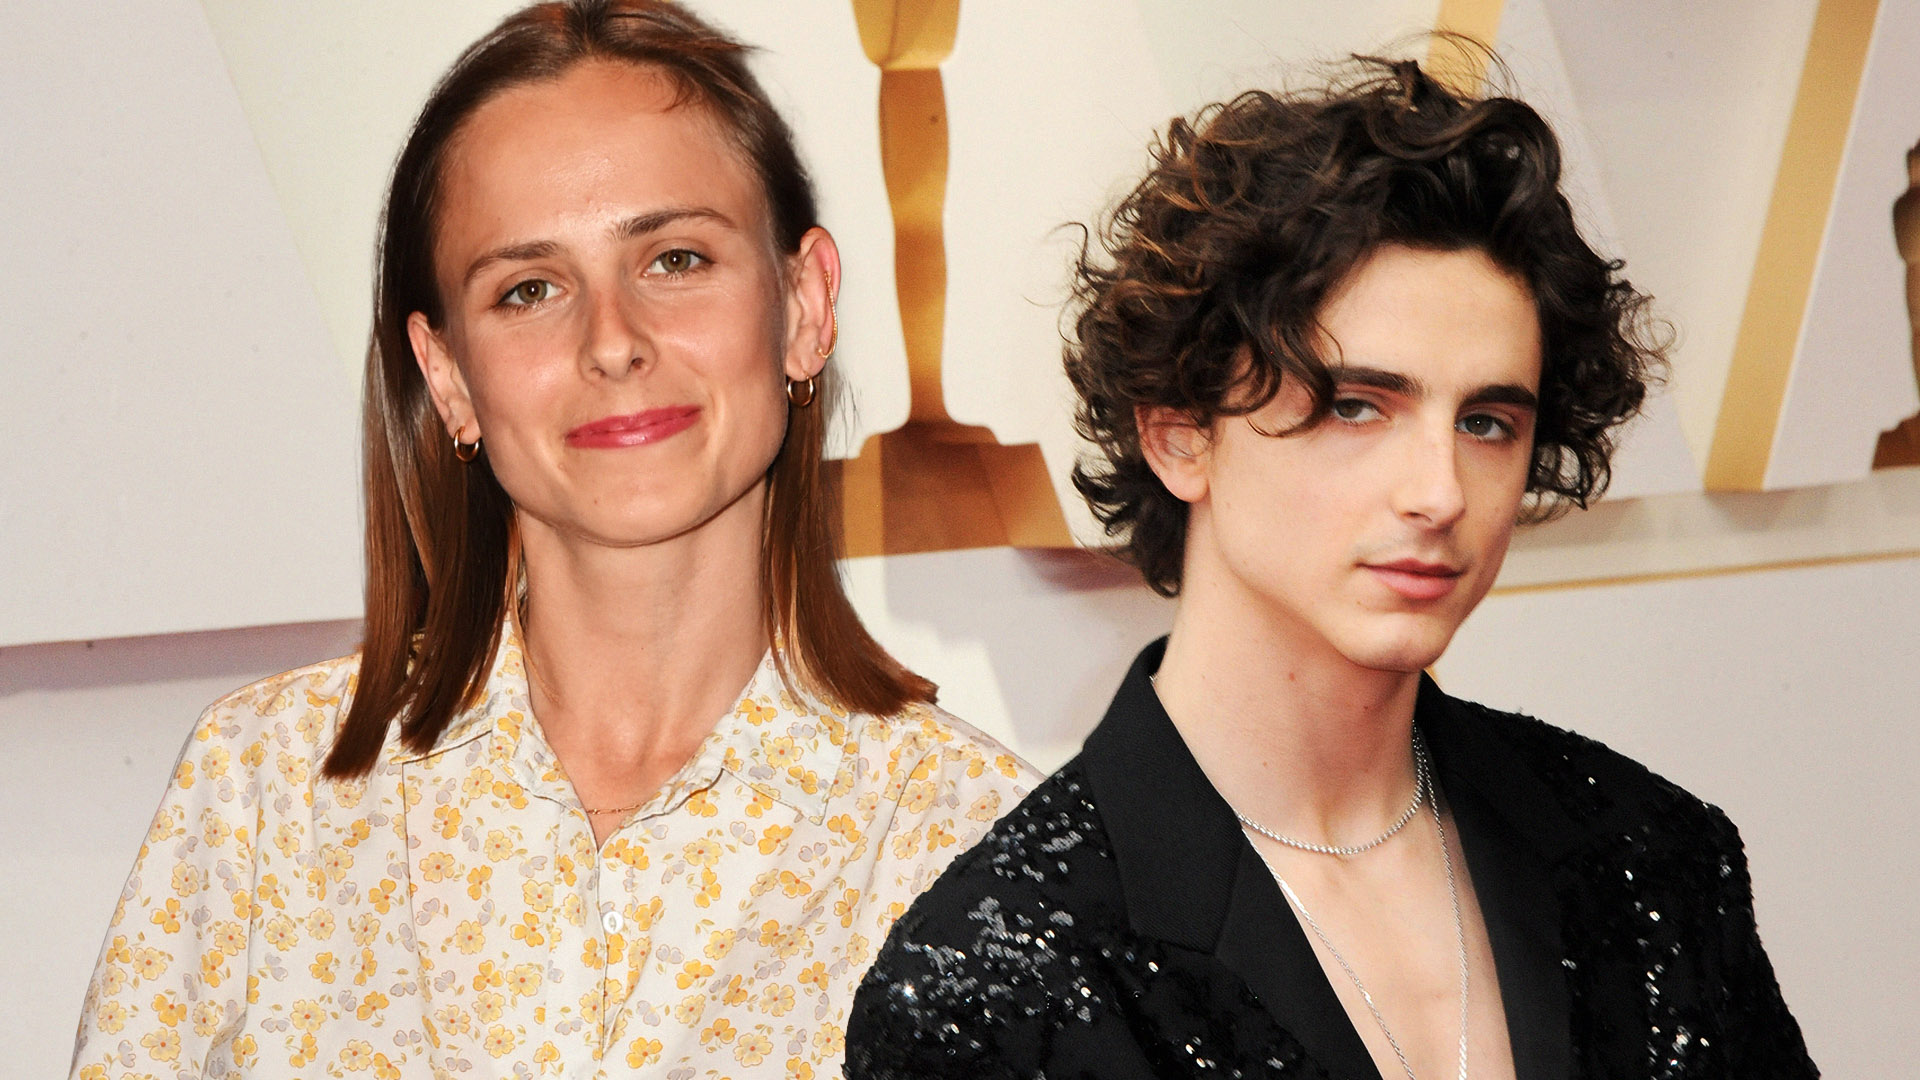 Don't Rush Blaming Timothée Chalamet for Missing His Sister's Movie Premiere